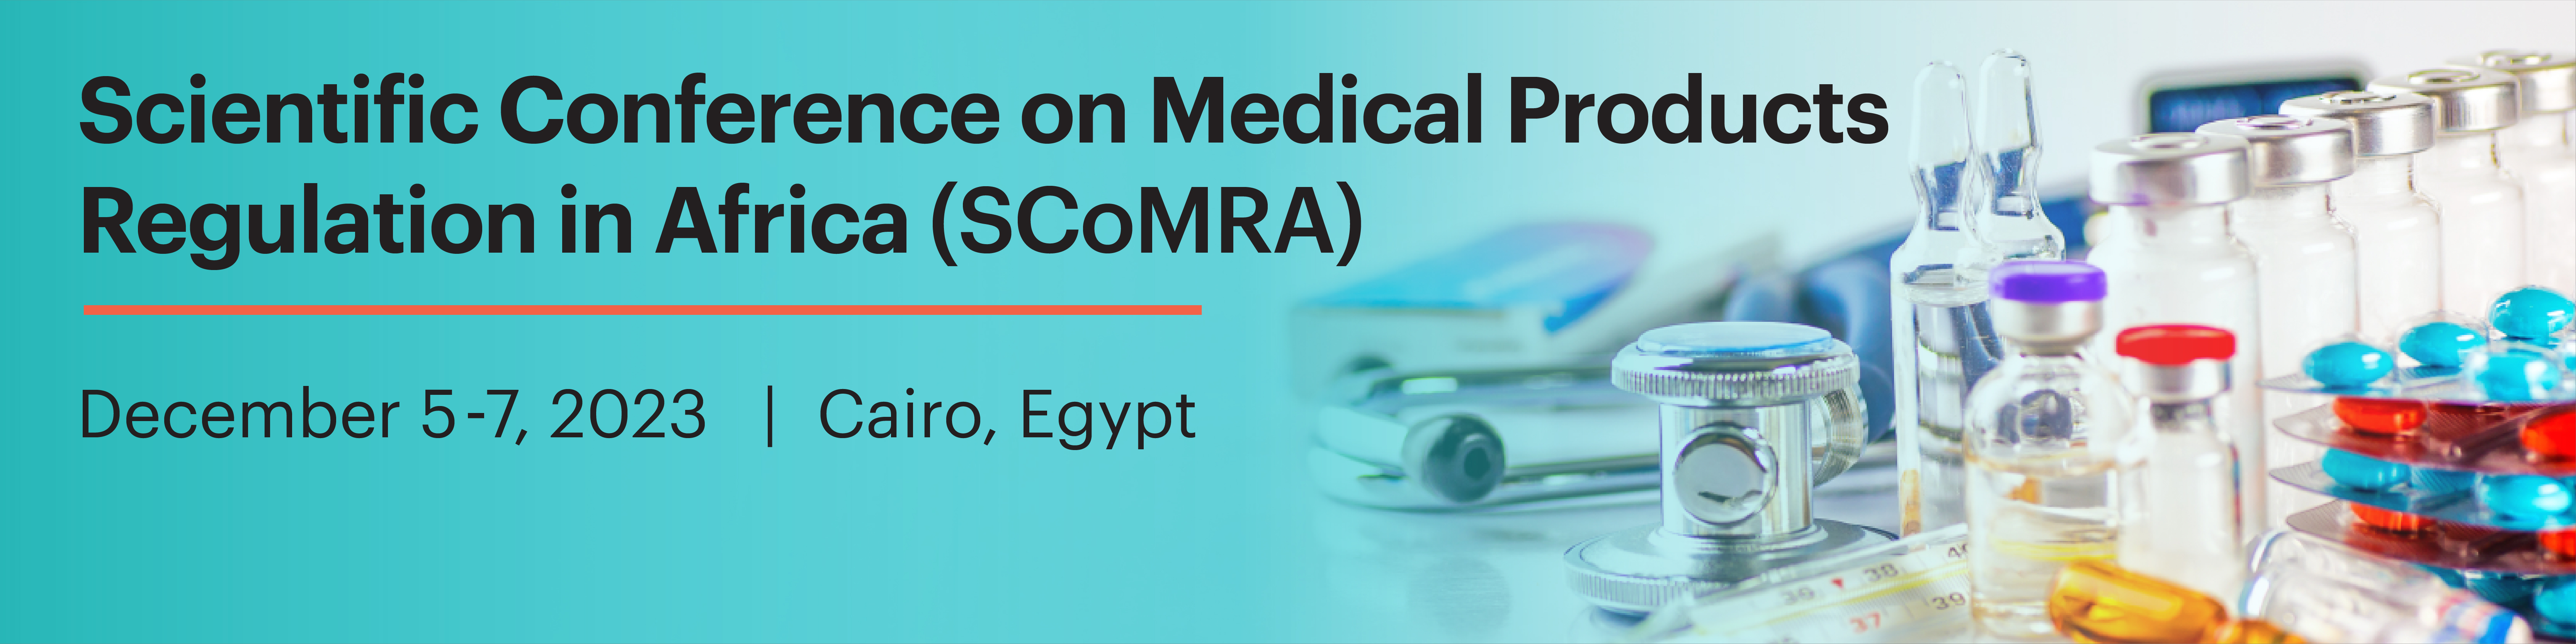 Scientific Conference on Medical Products Regulation in Africa (SCoMRA)